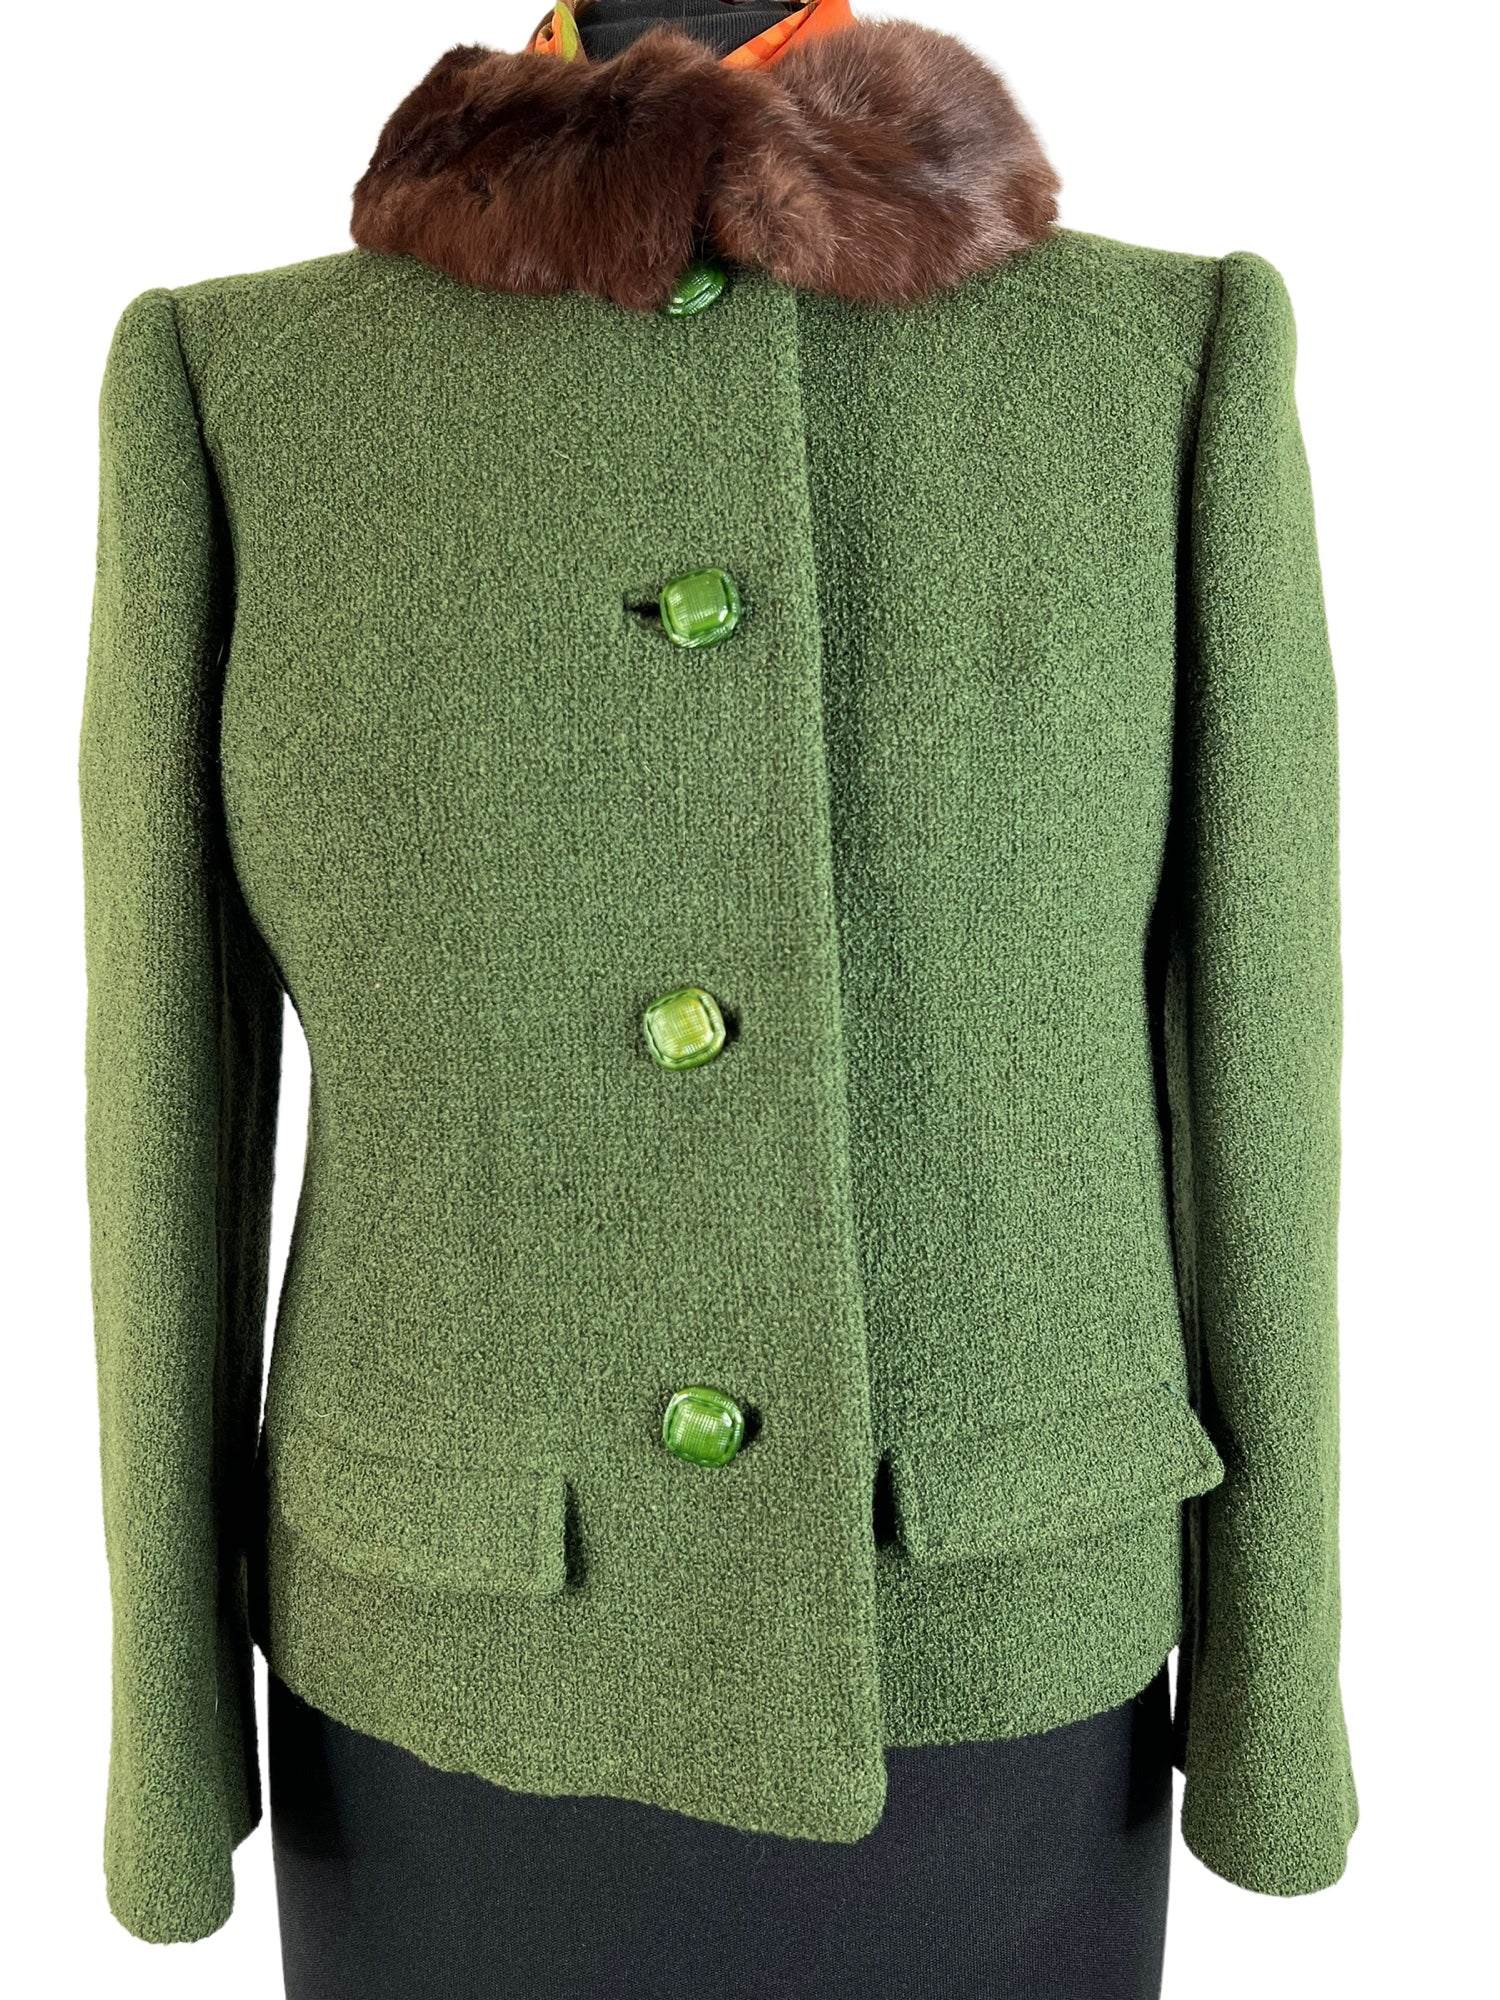 zero waste  womens  Winter Coat  winter  vintage  Urban Village Vintage  urban village  UK  thrifted  thrift  sustainable  style  store  slow fashion  short length  short  shop  second hand  save the planet  reuse  recycled  recycle  recycable  preloved  online  ocassion  modette  MOD  ladies  Jacket  Green  festive  fashion  fabric button  ethical  Eco friendly  Eco  cropped  cream  coney fur collar  Coney Fur  coney  concious fashion  collar  coat  clothing  clothes  christmassy  60s  1960s  12